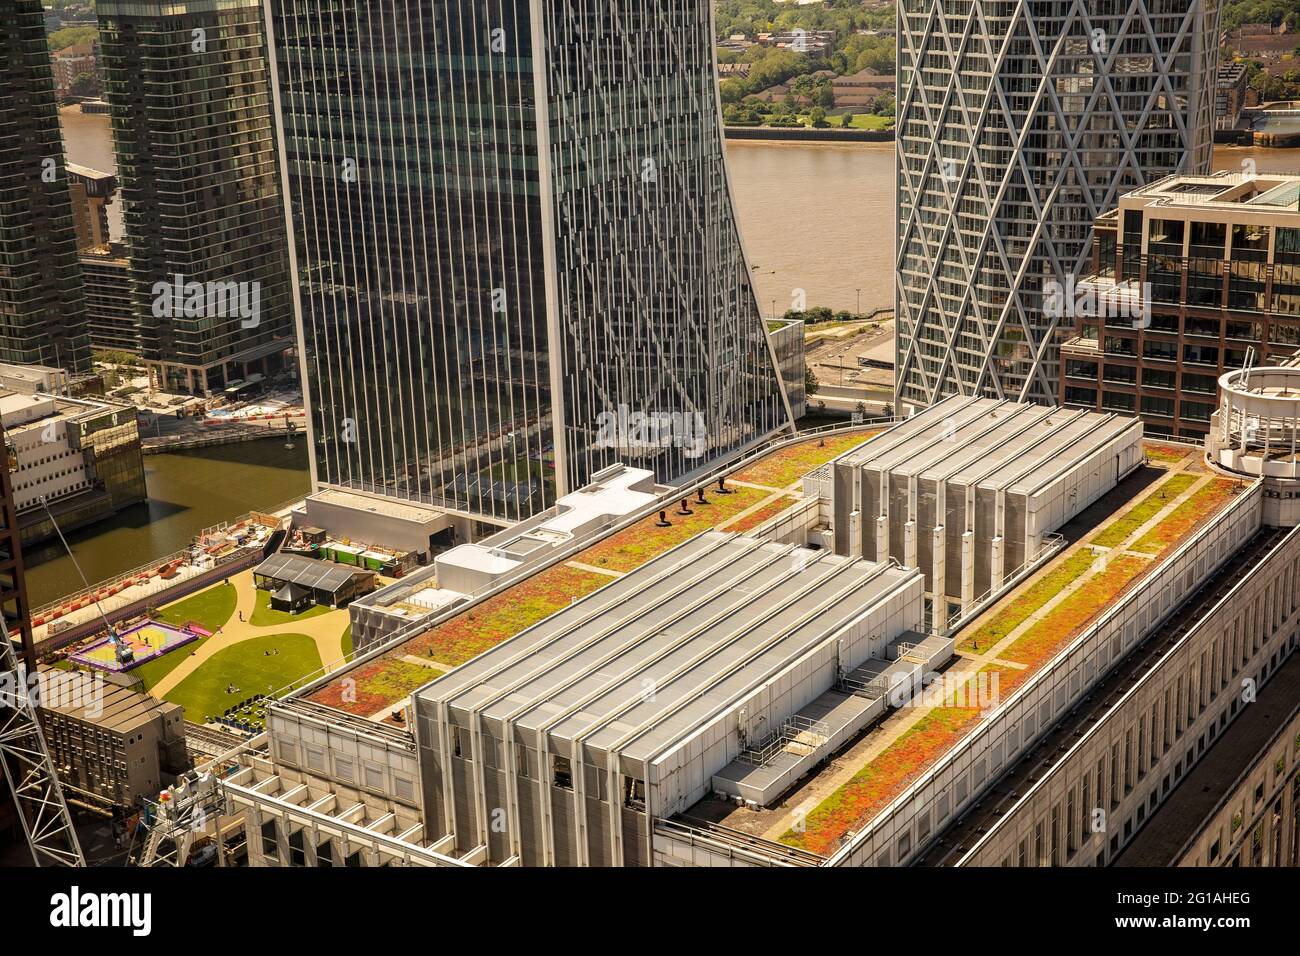 Green Roof's in Canary Wharf Stockfoto